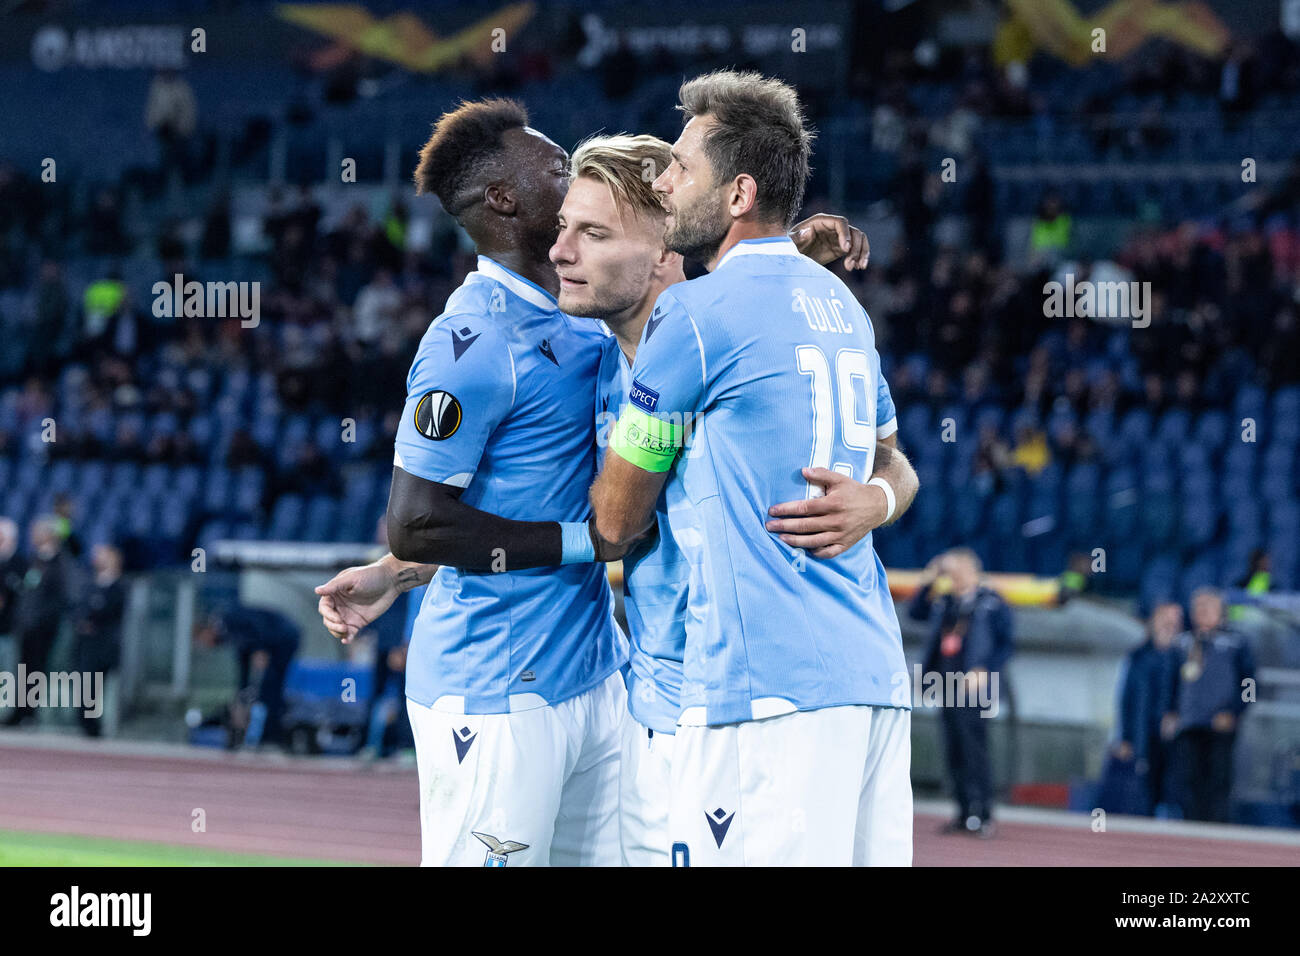 Lazio team 2019 hi-res stock photography and images - Alamy